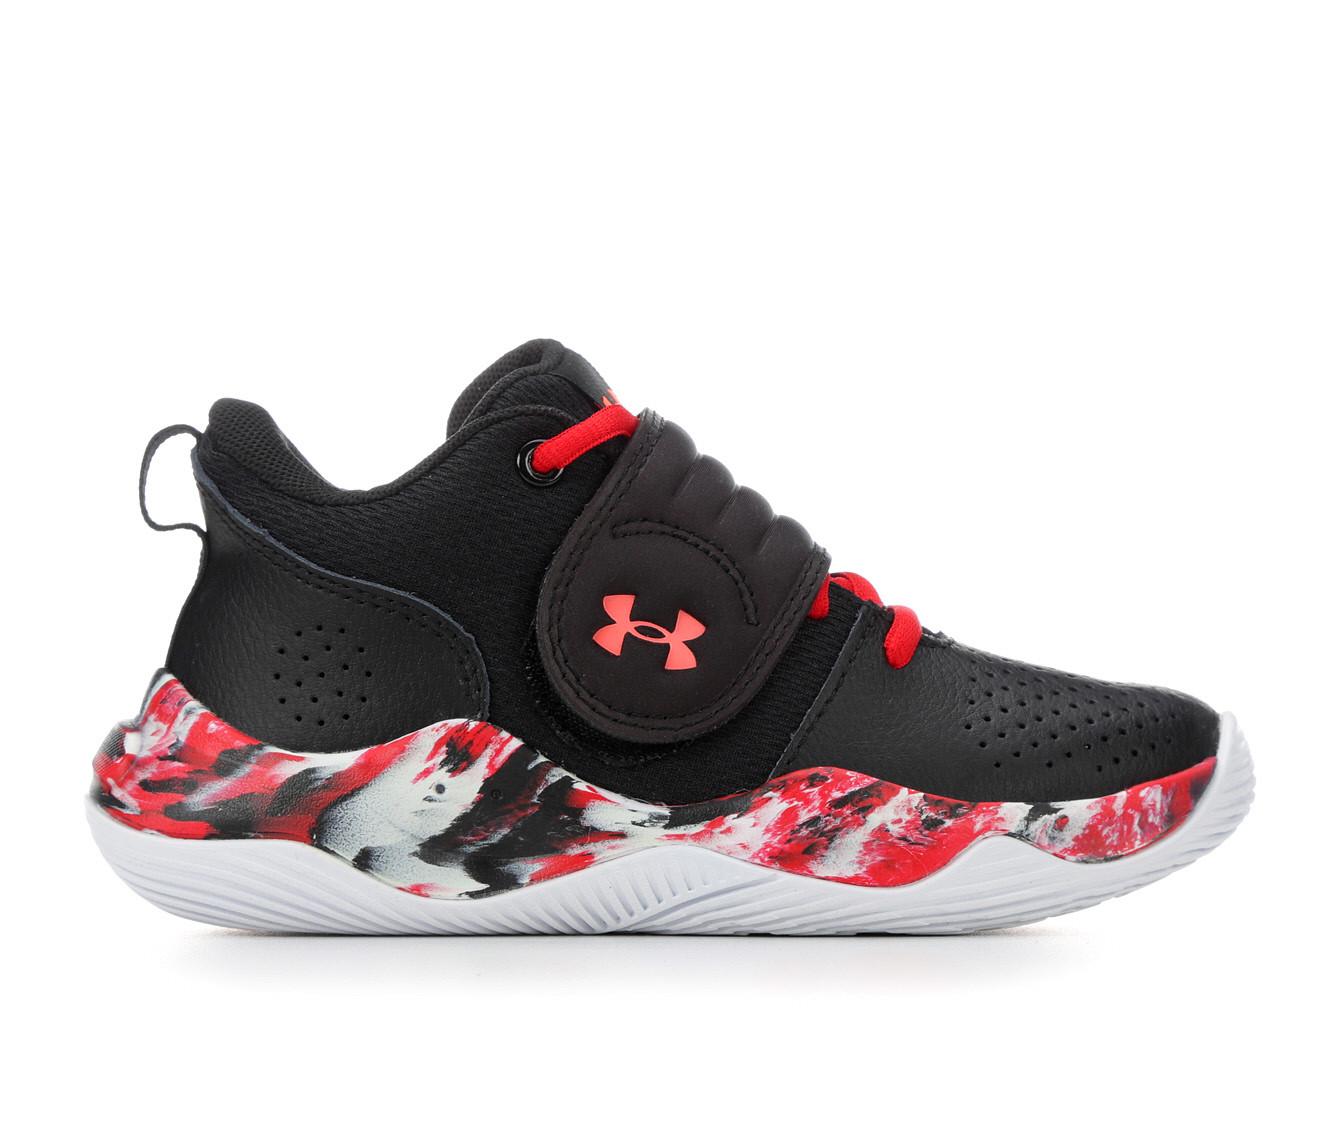 Boys' Under Armour Little Kid Zone Basketball Shoes